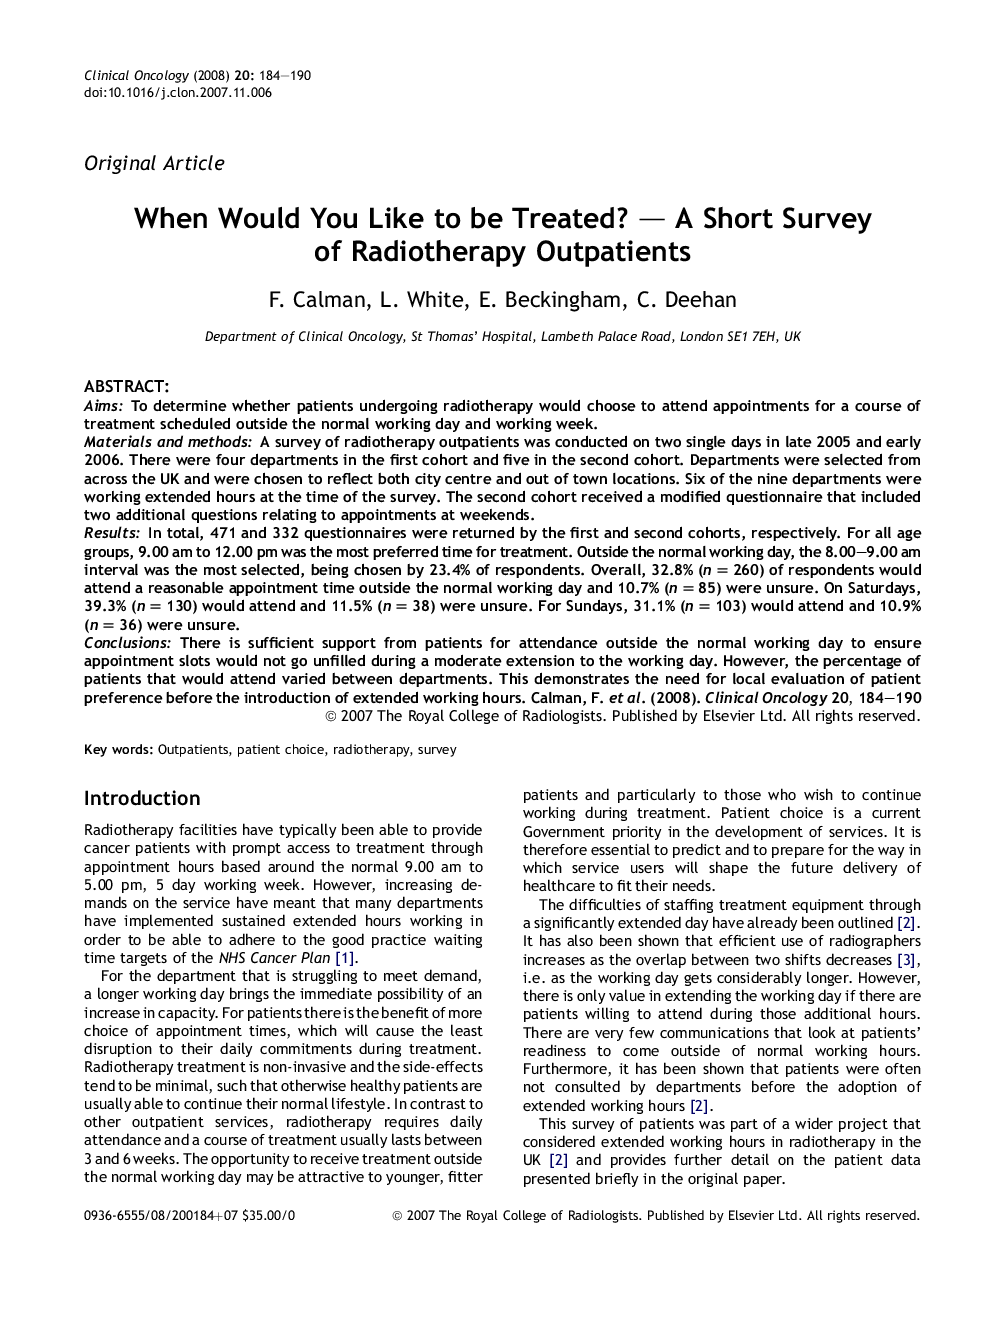 When Would You Like to be Treated? - A Short Survey of Radiotherapy Outpatients